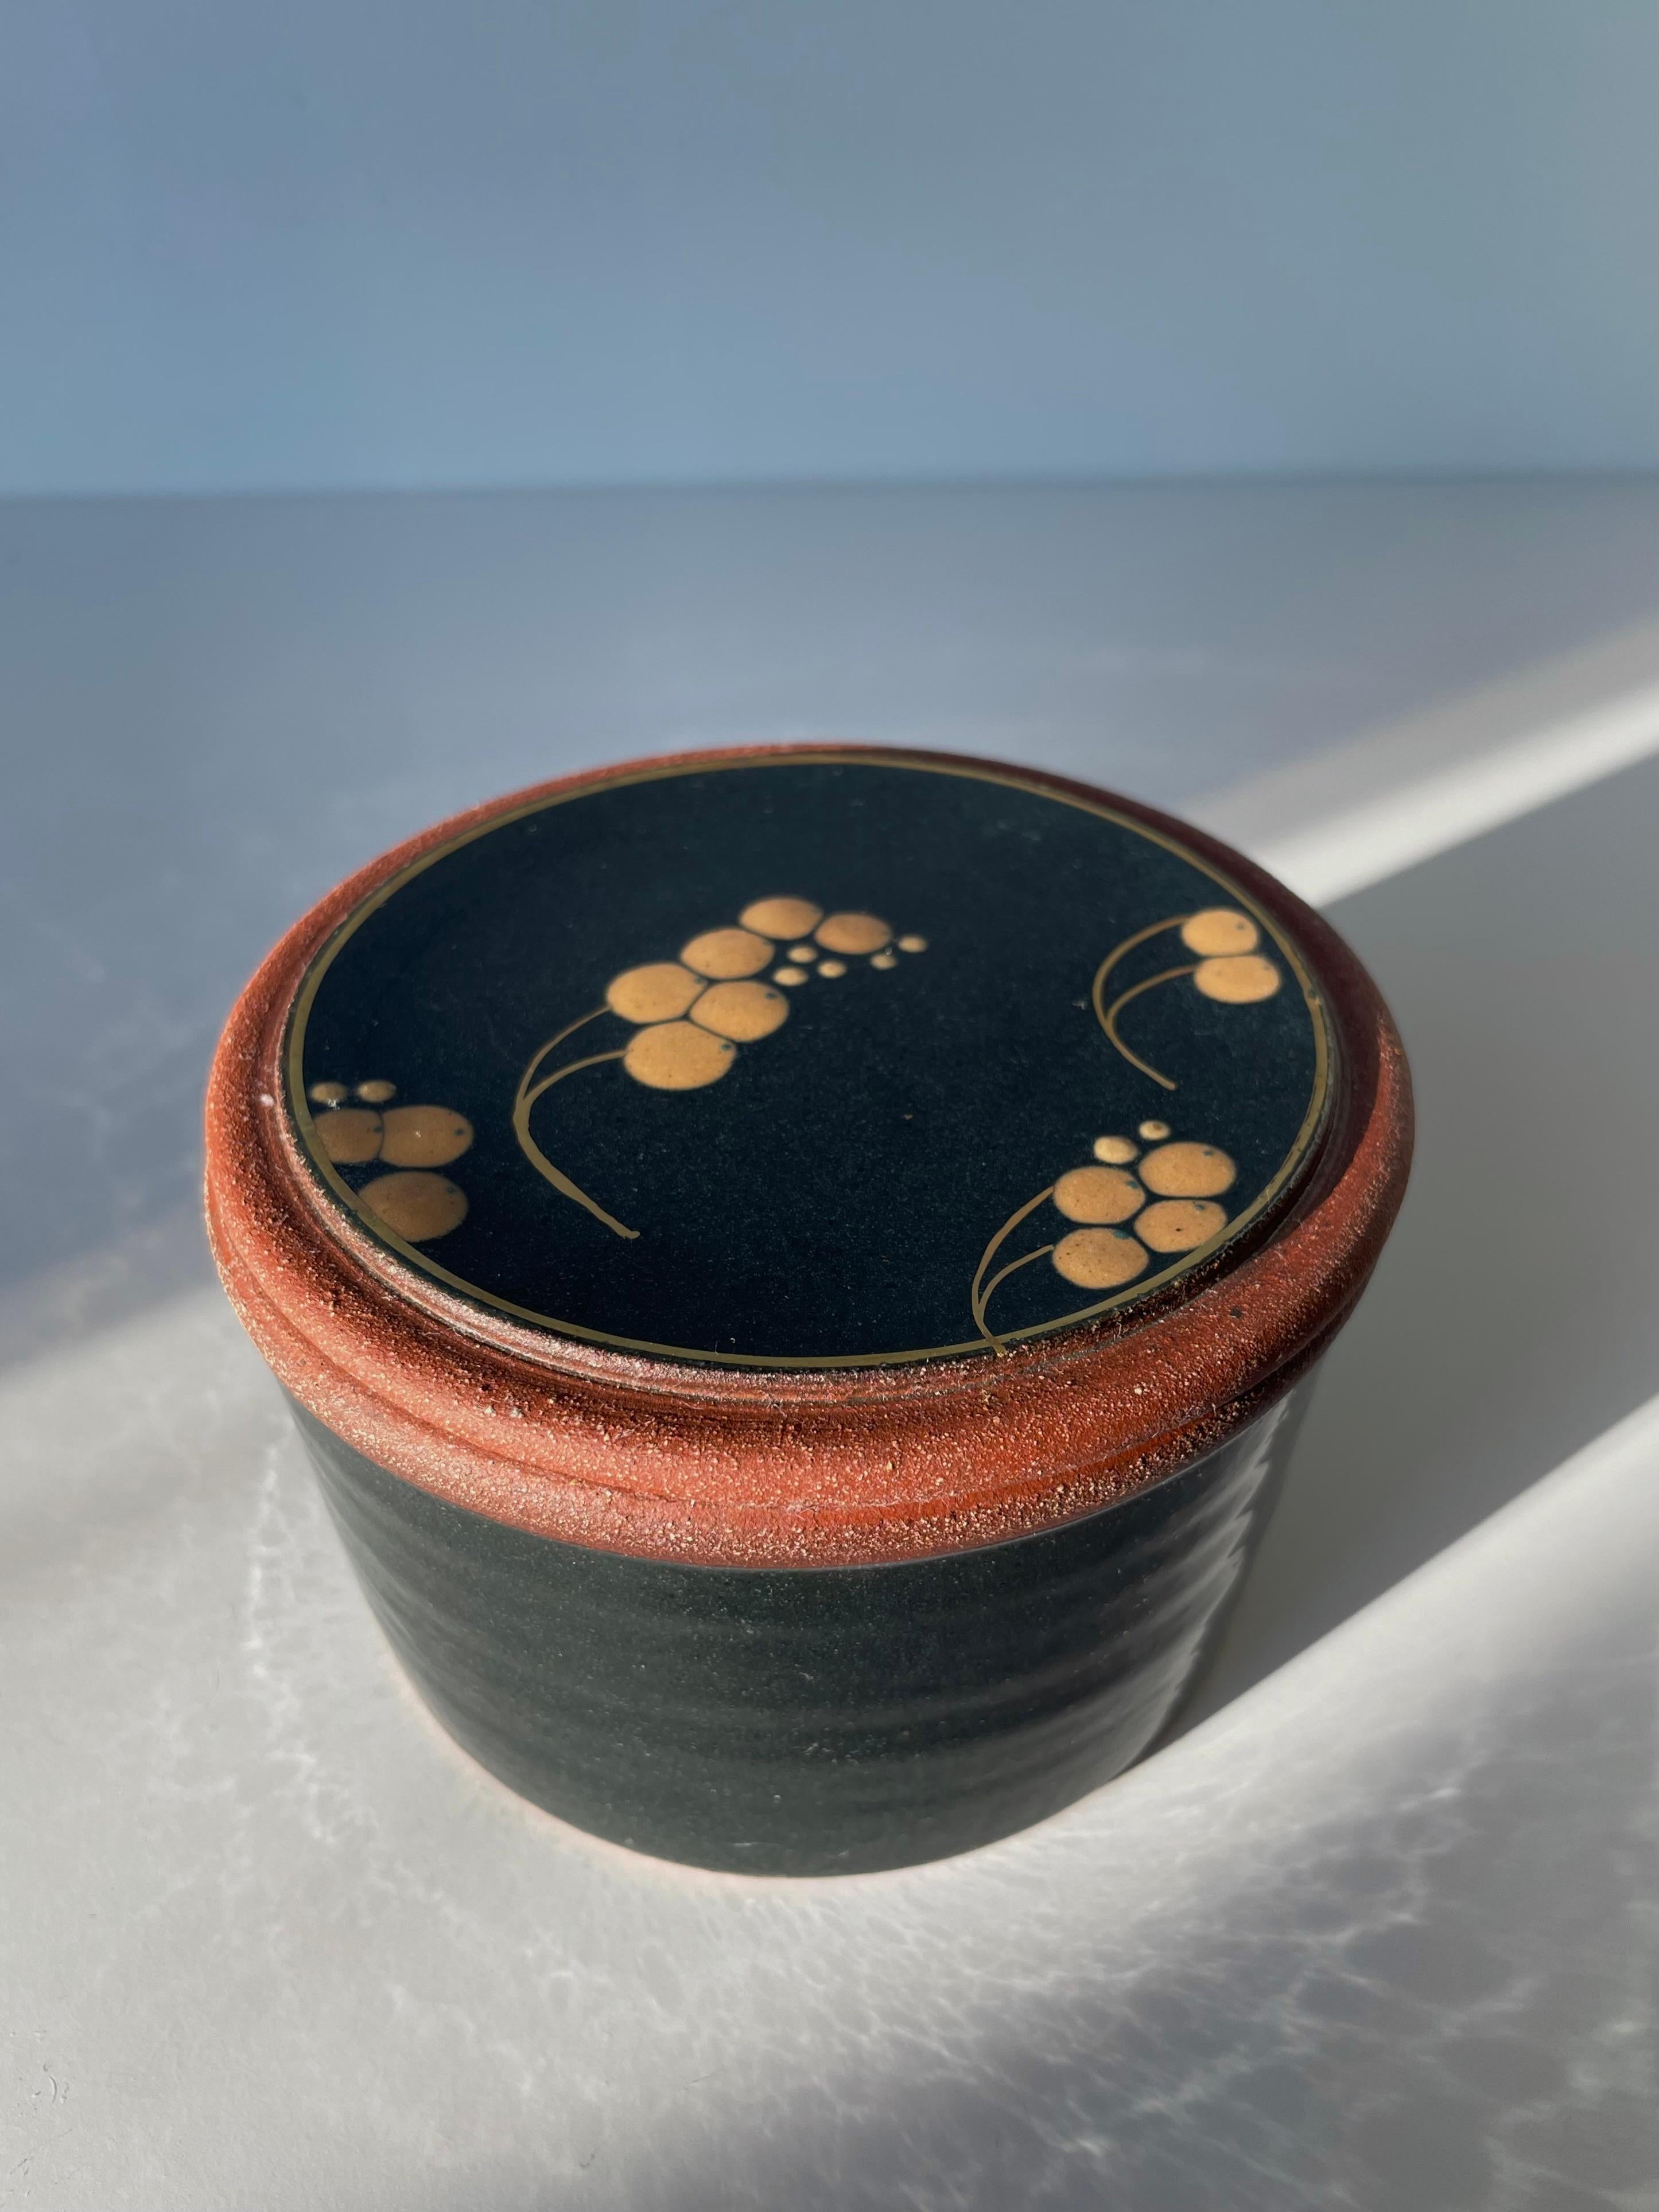 Hand-thrown modern ceramic lidded bonbonniére jar by Danish artist Ulla Sonne on the Danish island of Funen in the 2010s. Shiny black glaze with unglazed edges and base. Peach colored stylized organic decorations on lid. Signed under base. Beautiful